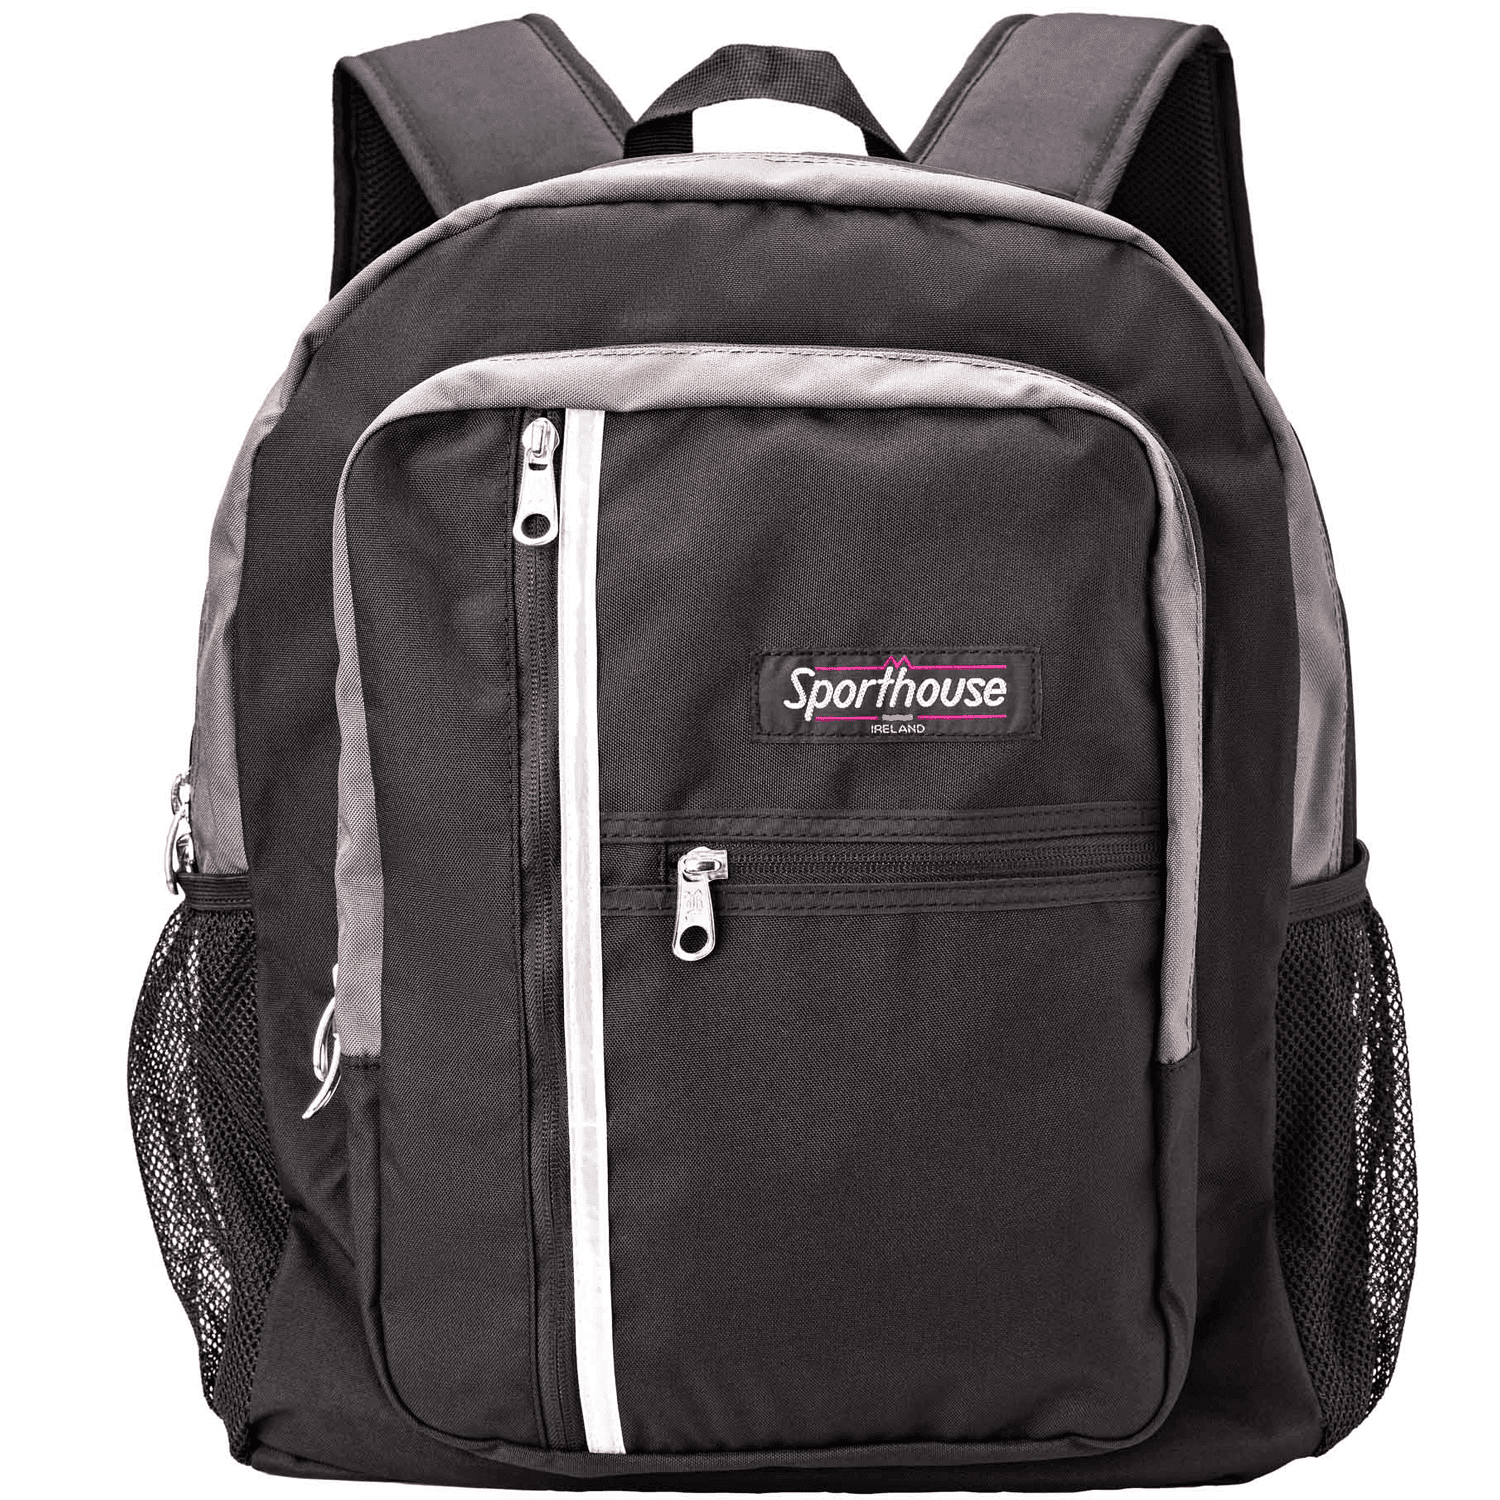 Sporthouse Student 2000 42L Backpack - Black 1 Shaws Department Stores